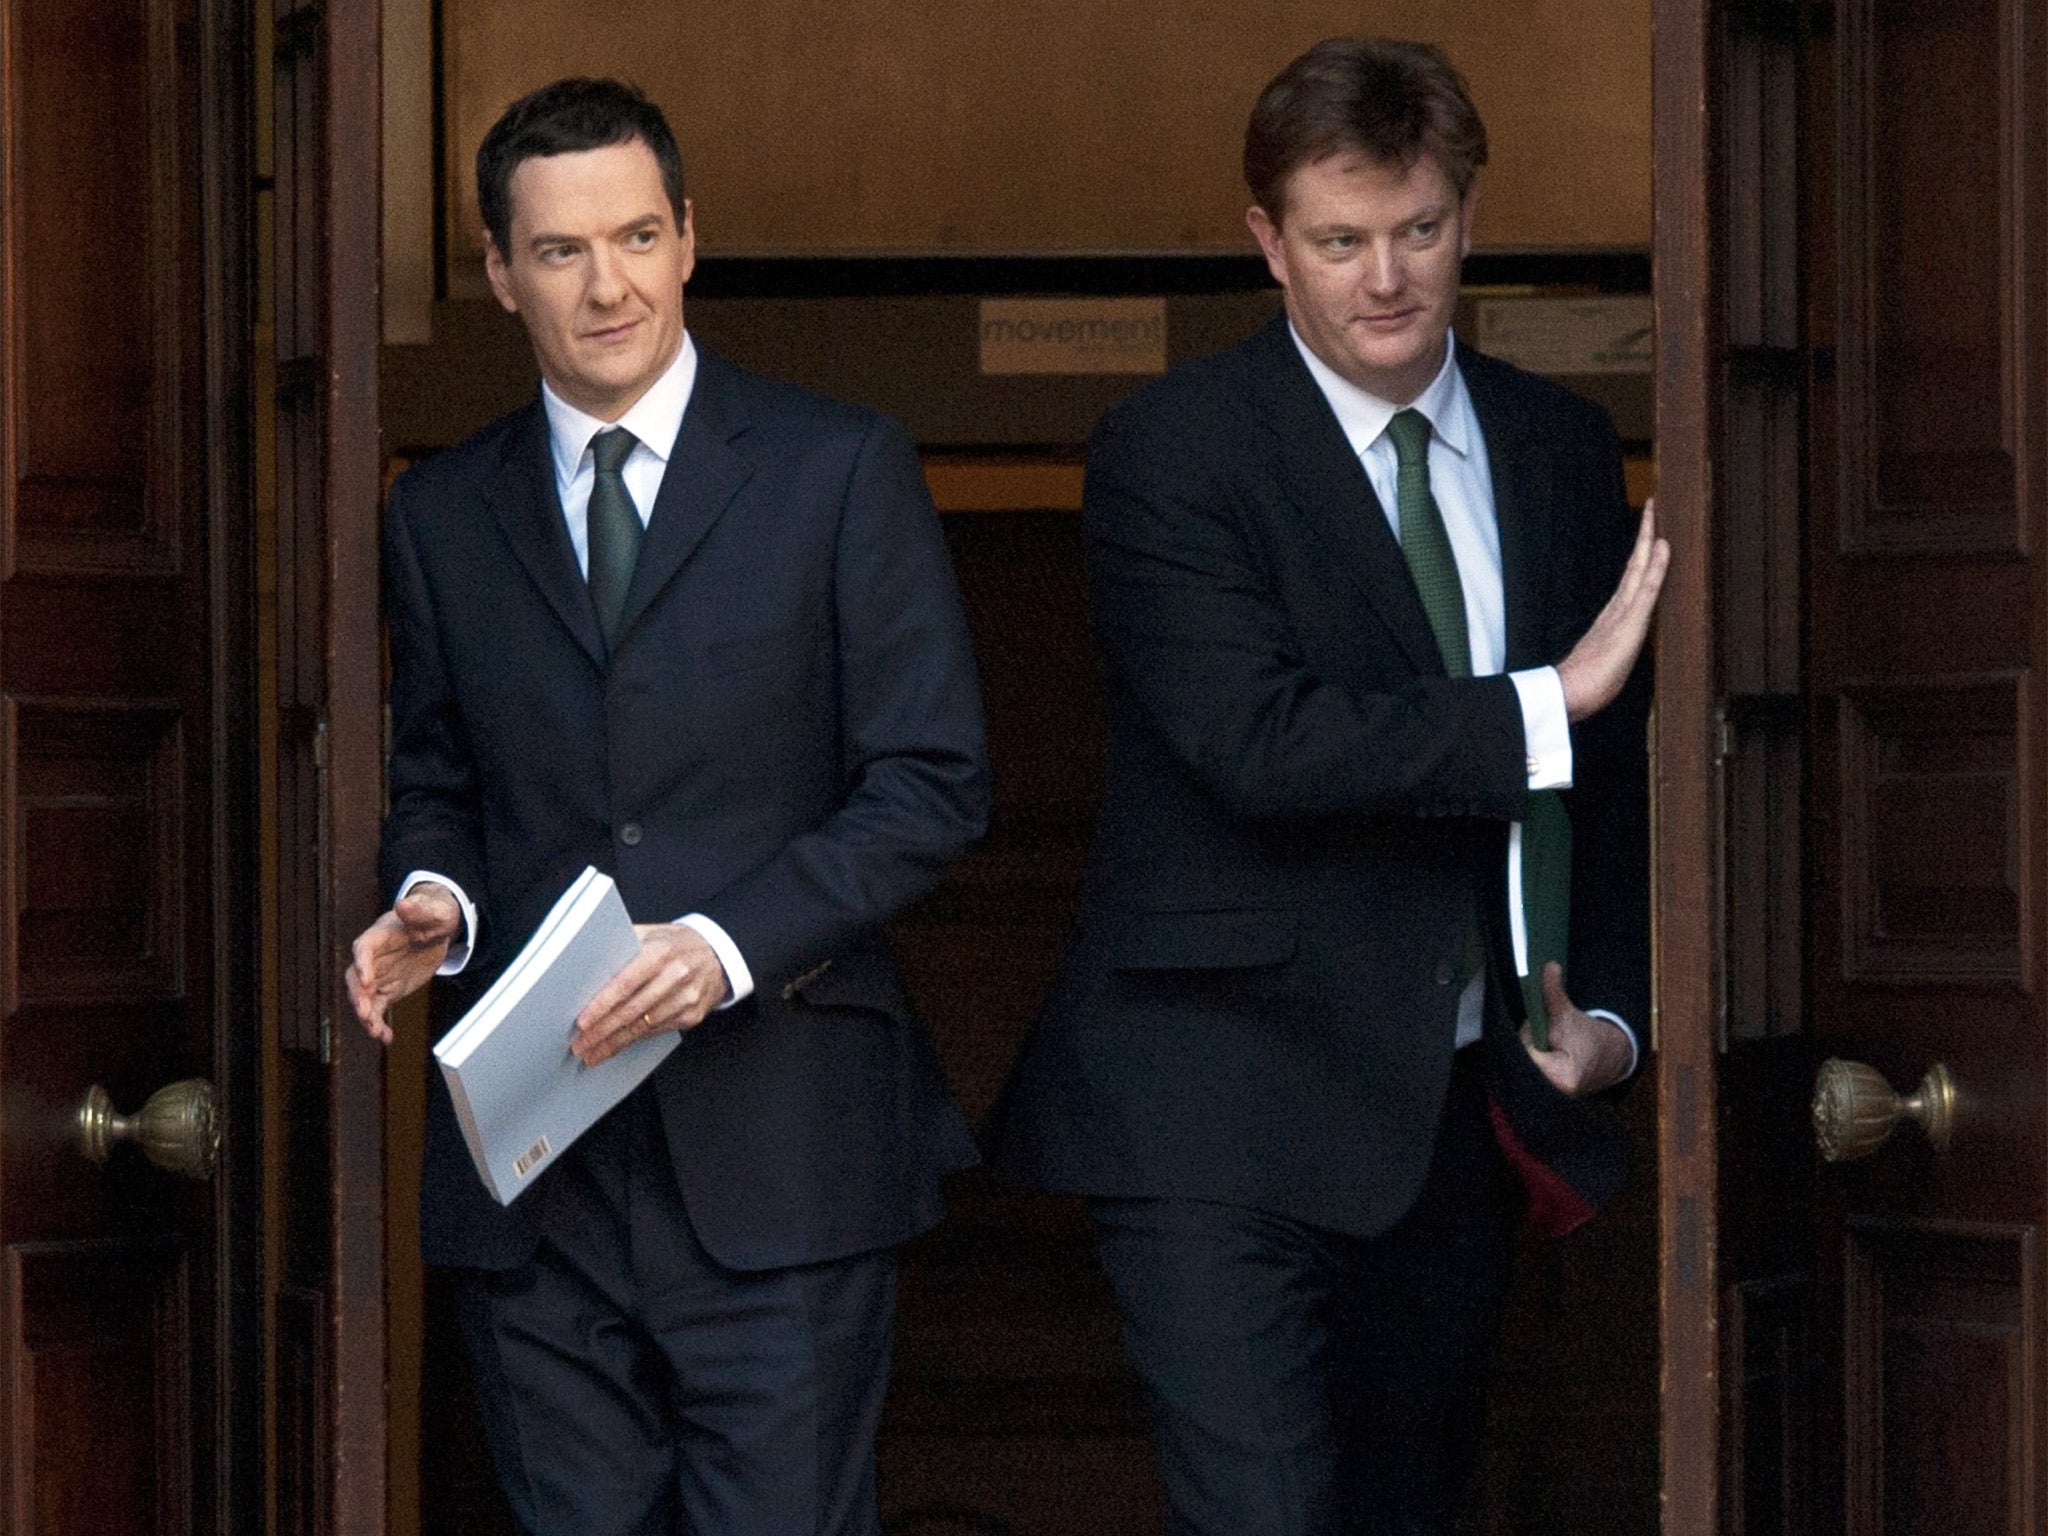 Danny Alexander and George Osborne before the Autumn Statement